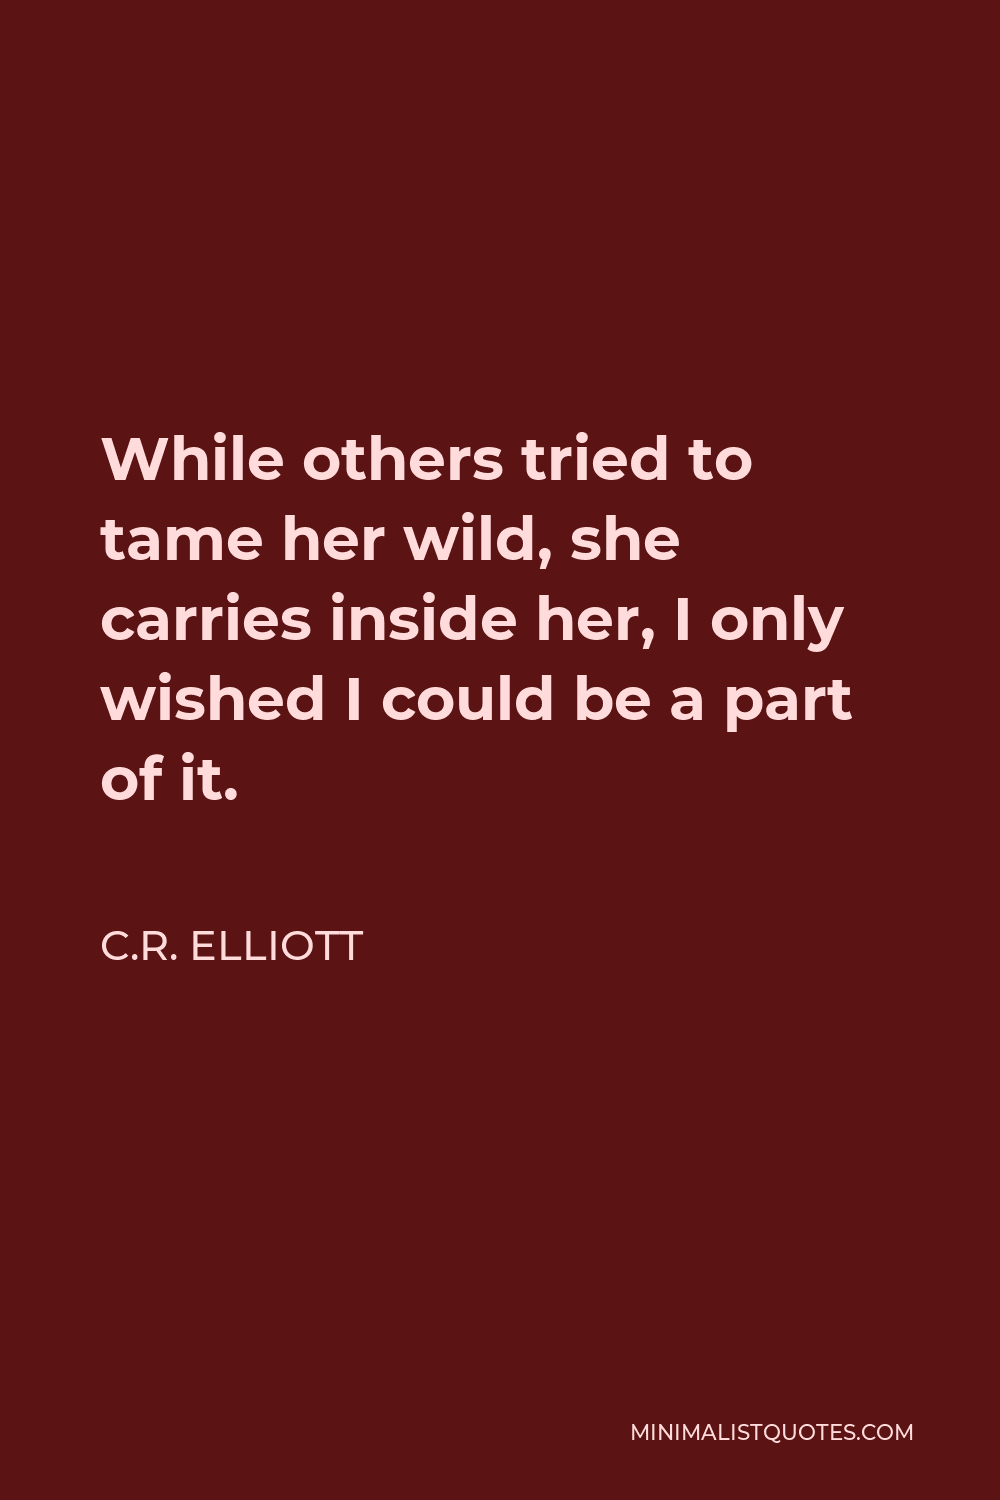 C.R. Elliott Quote - While others tried to tame her wild, she carries inside her, I only wished I could be a part of it.